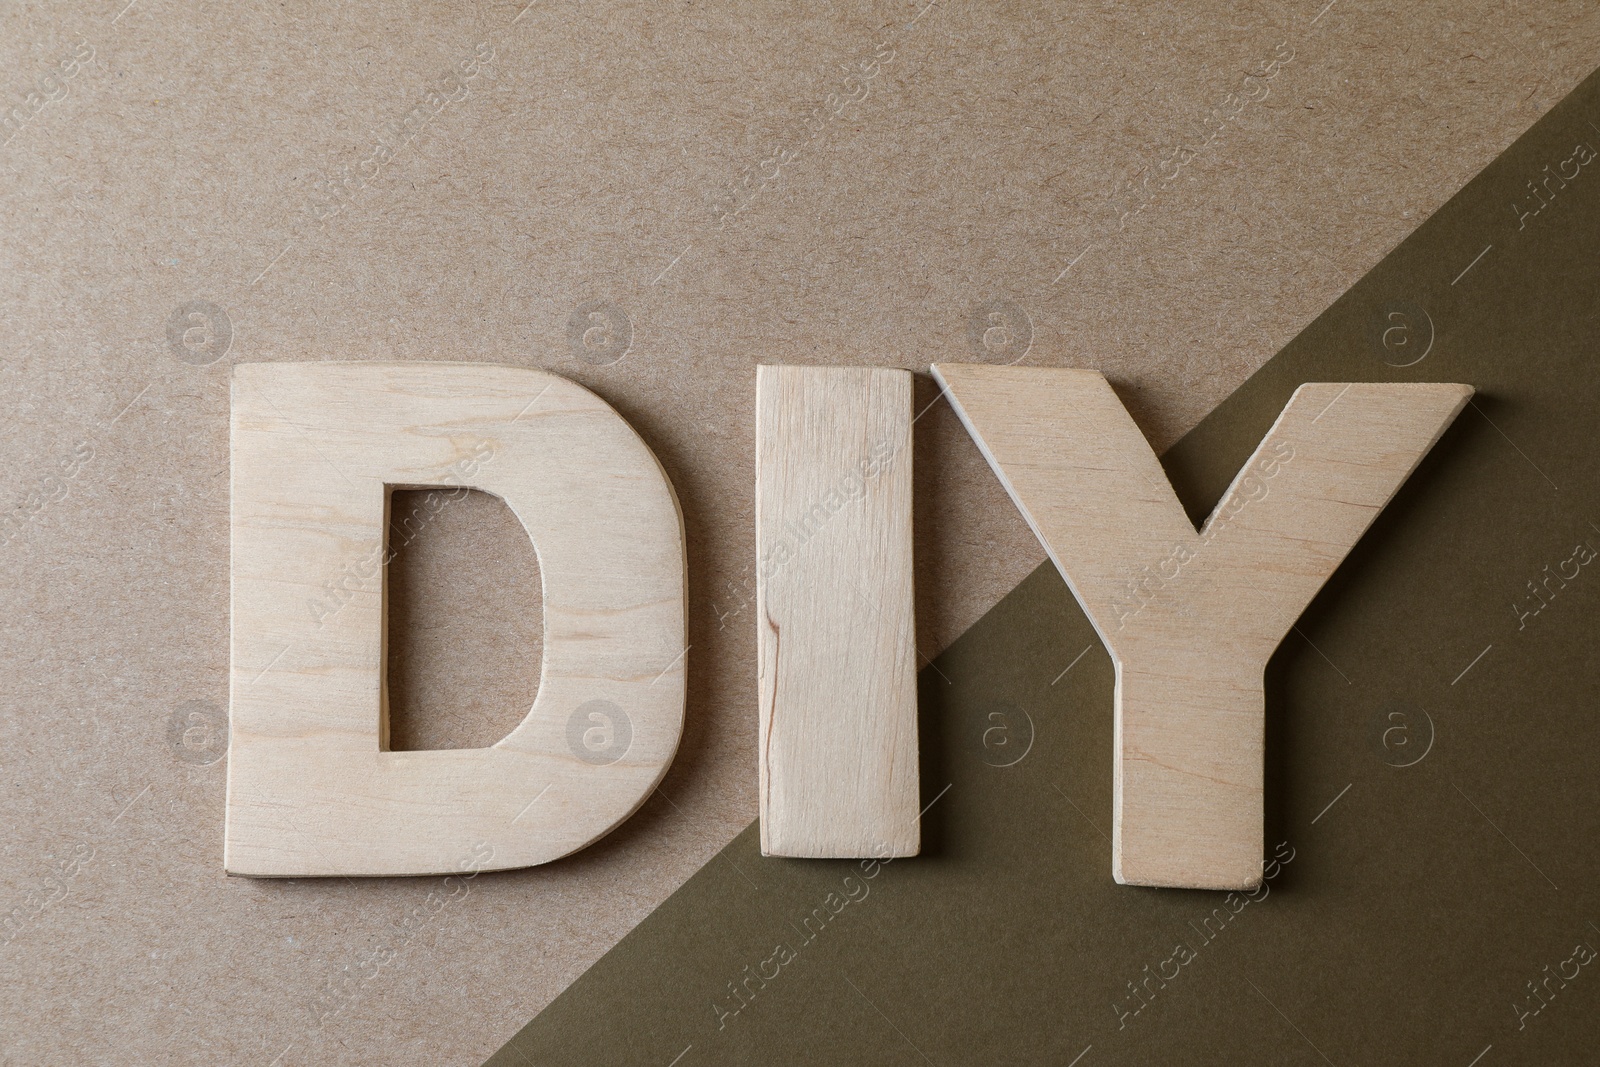 Photo of Abbreviation DIY made of wooden letters on color background, flat lay